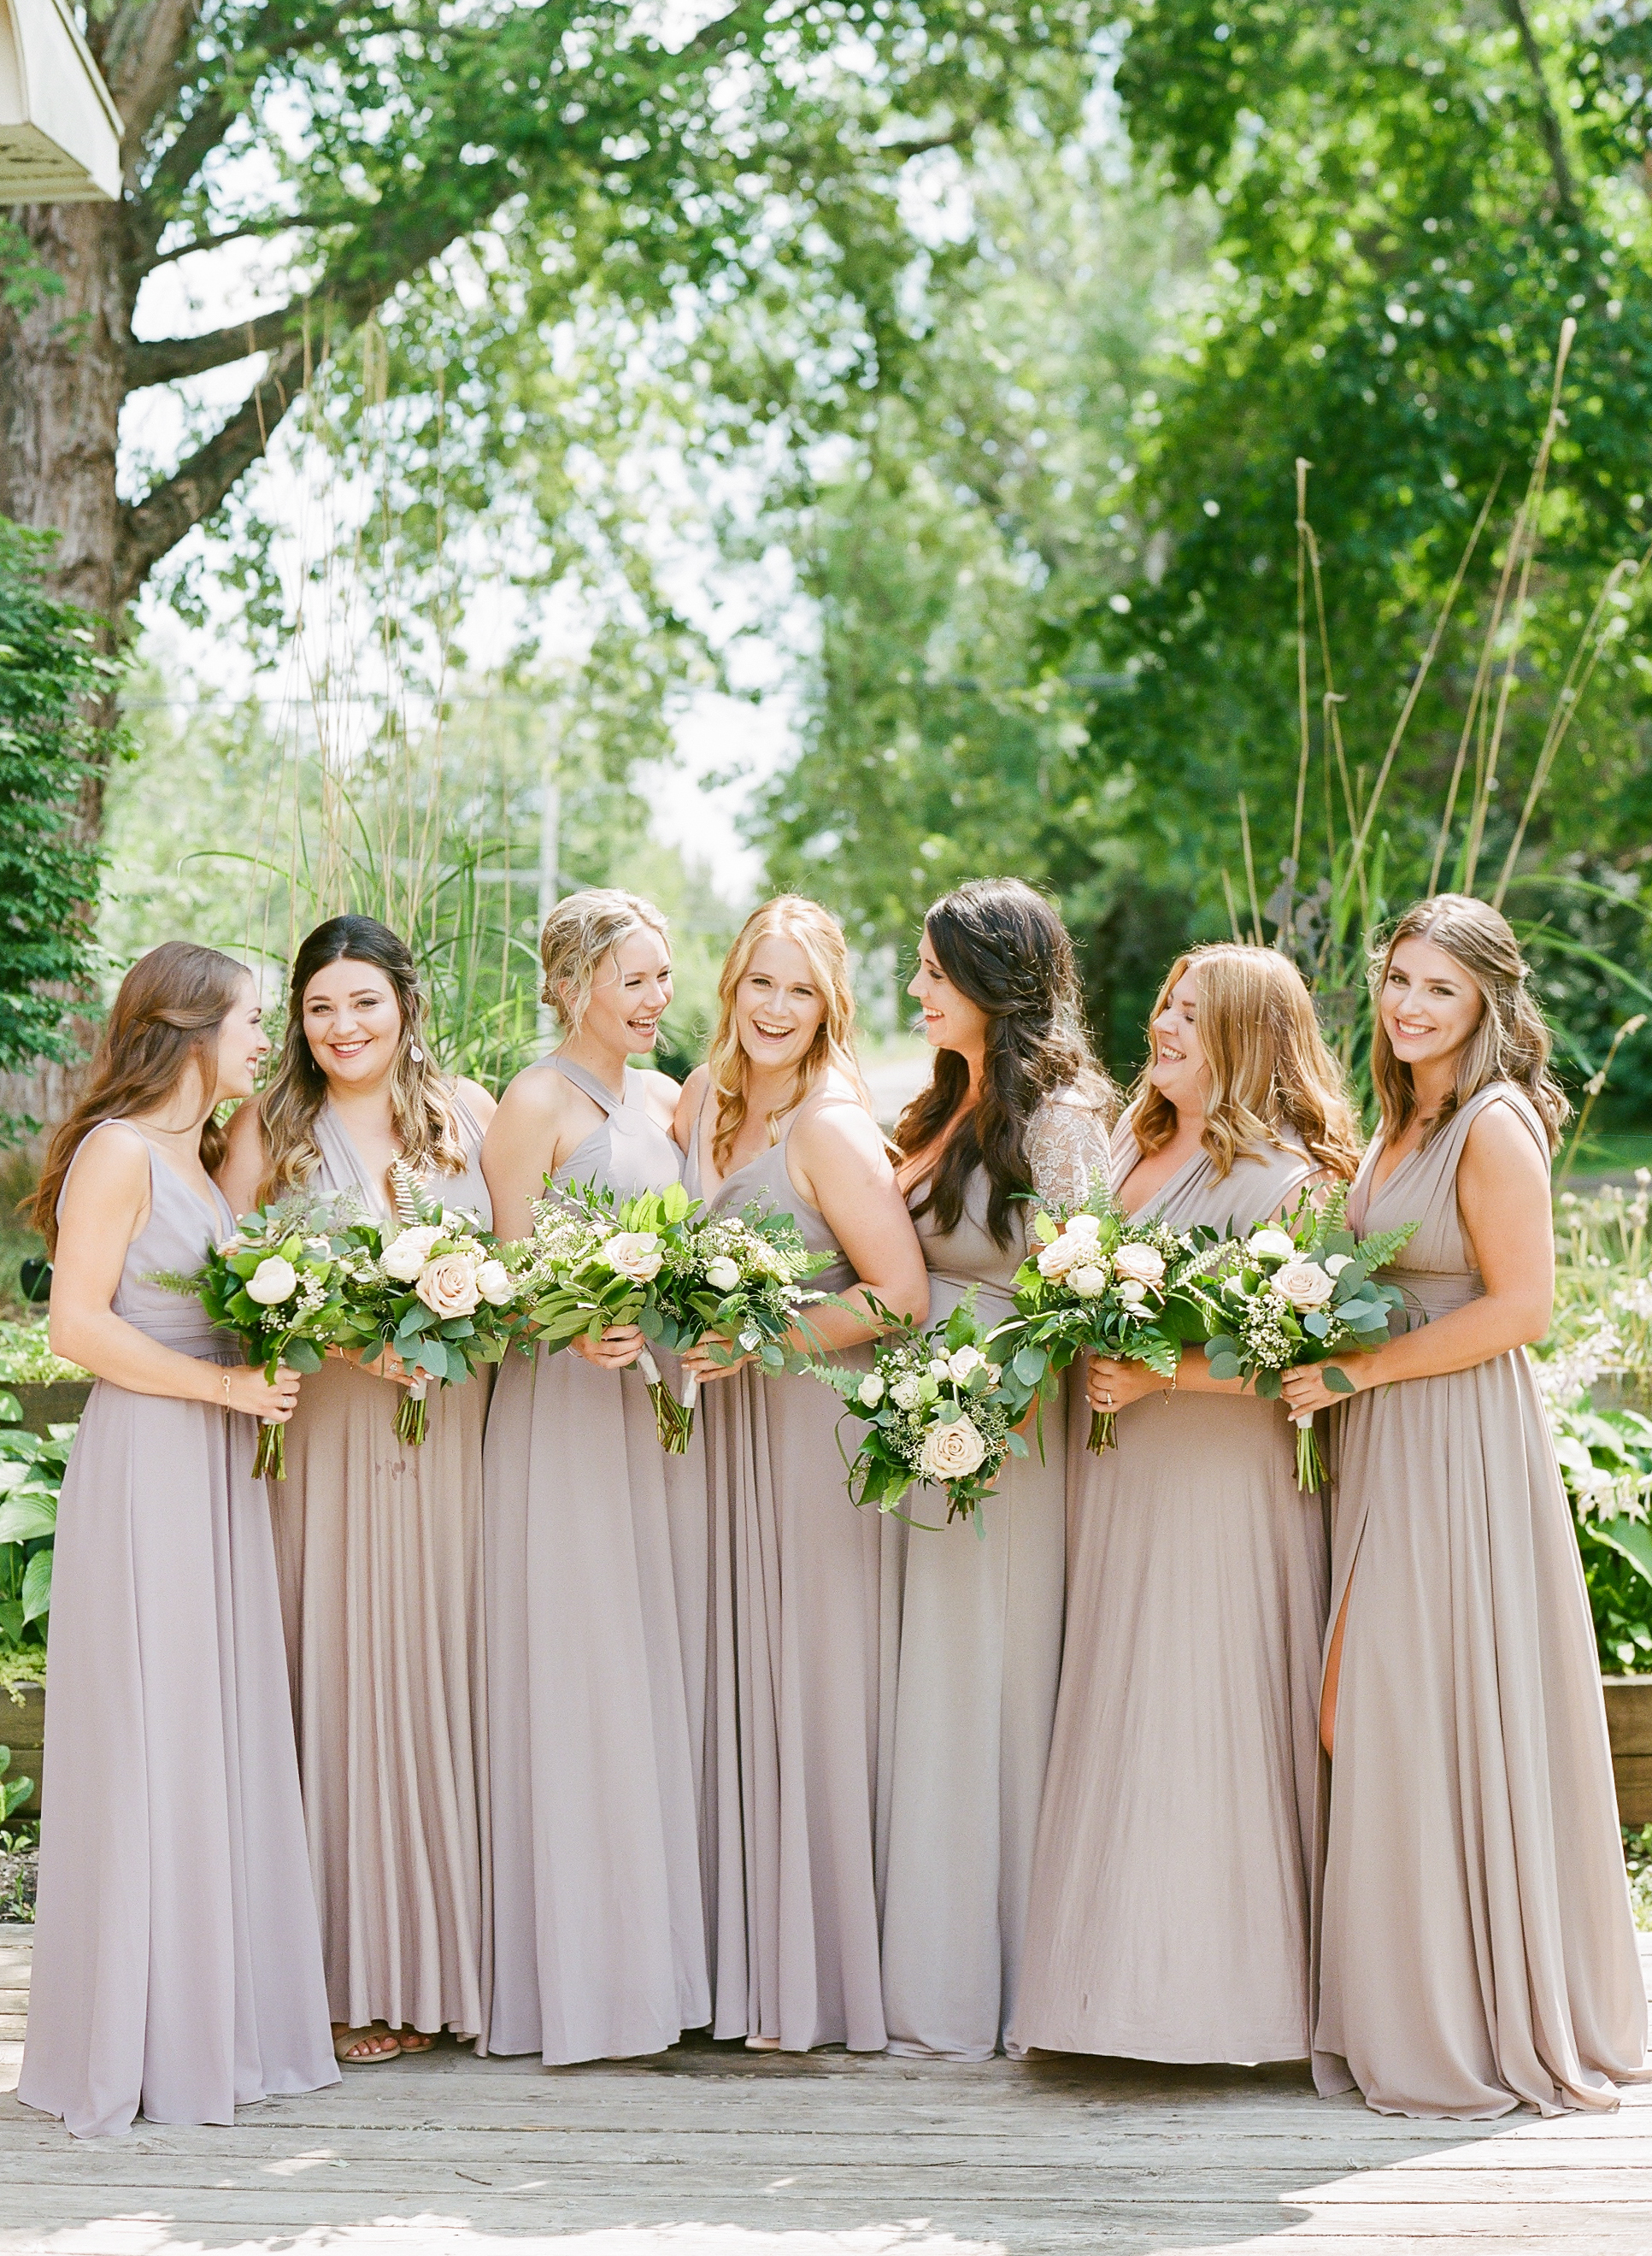 Halifax Wedding Photographer Jacqueline Anne Photography captures pink hued bridesmaid dresses in the Annapolis Valley